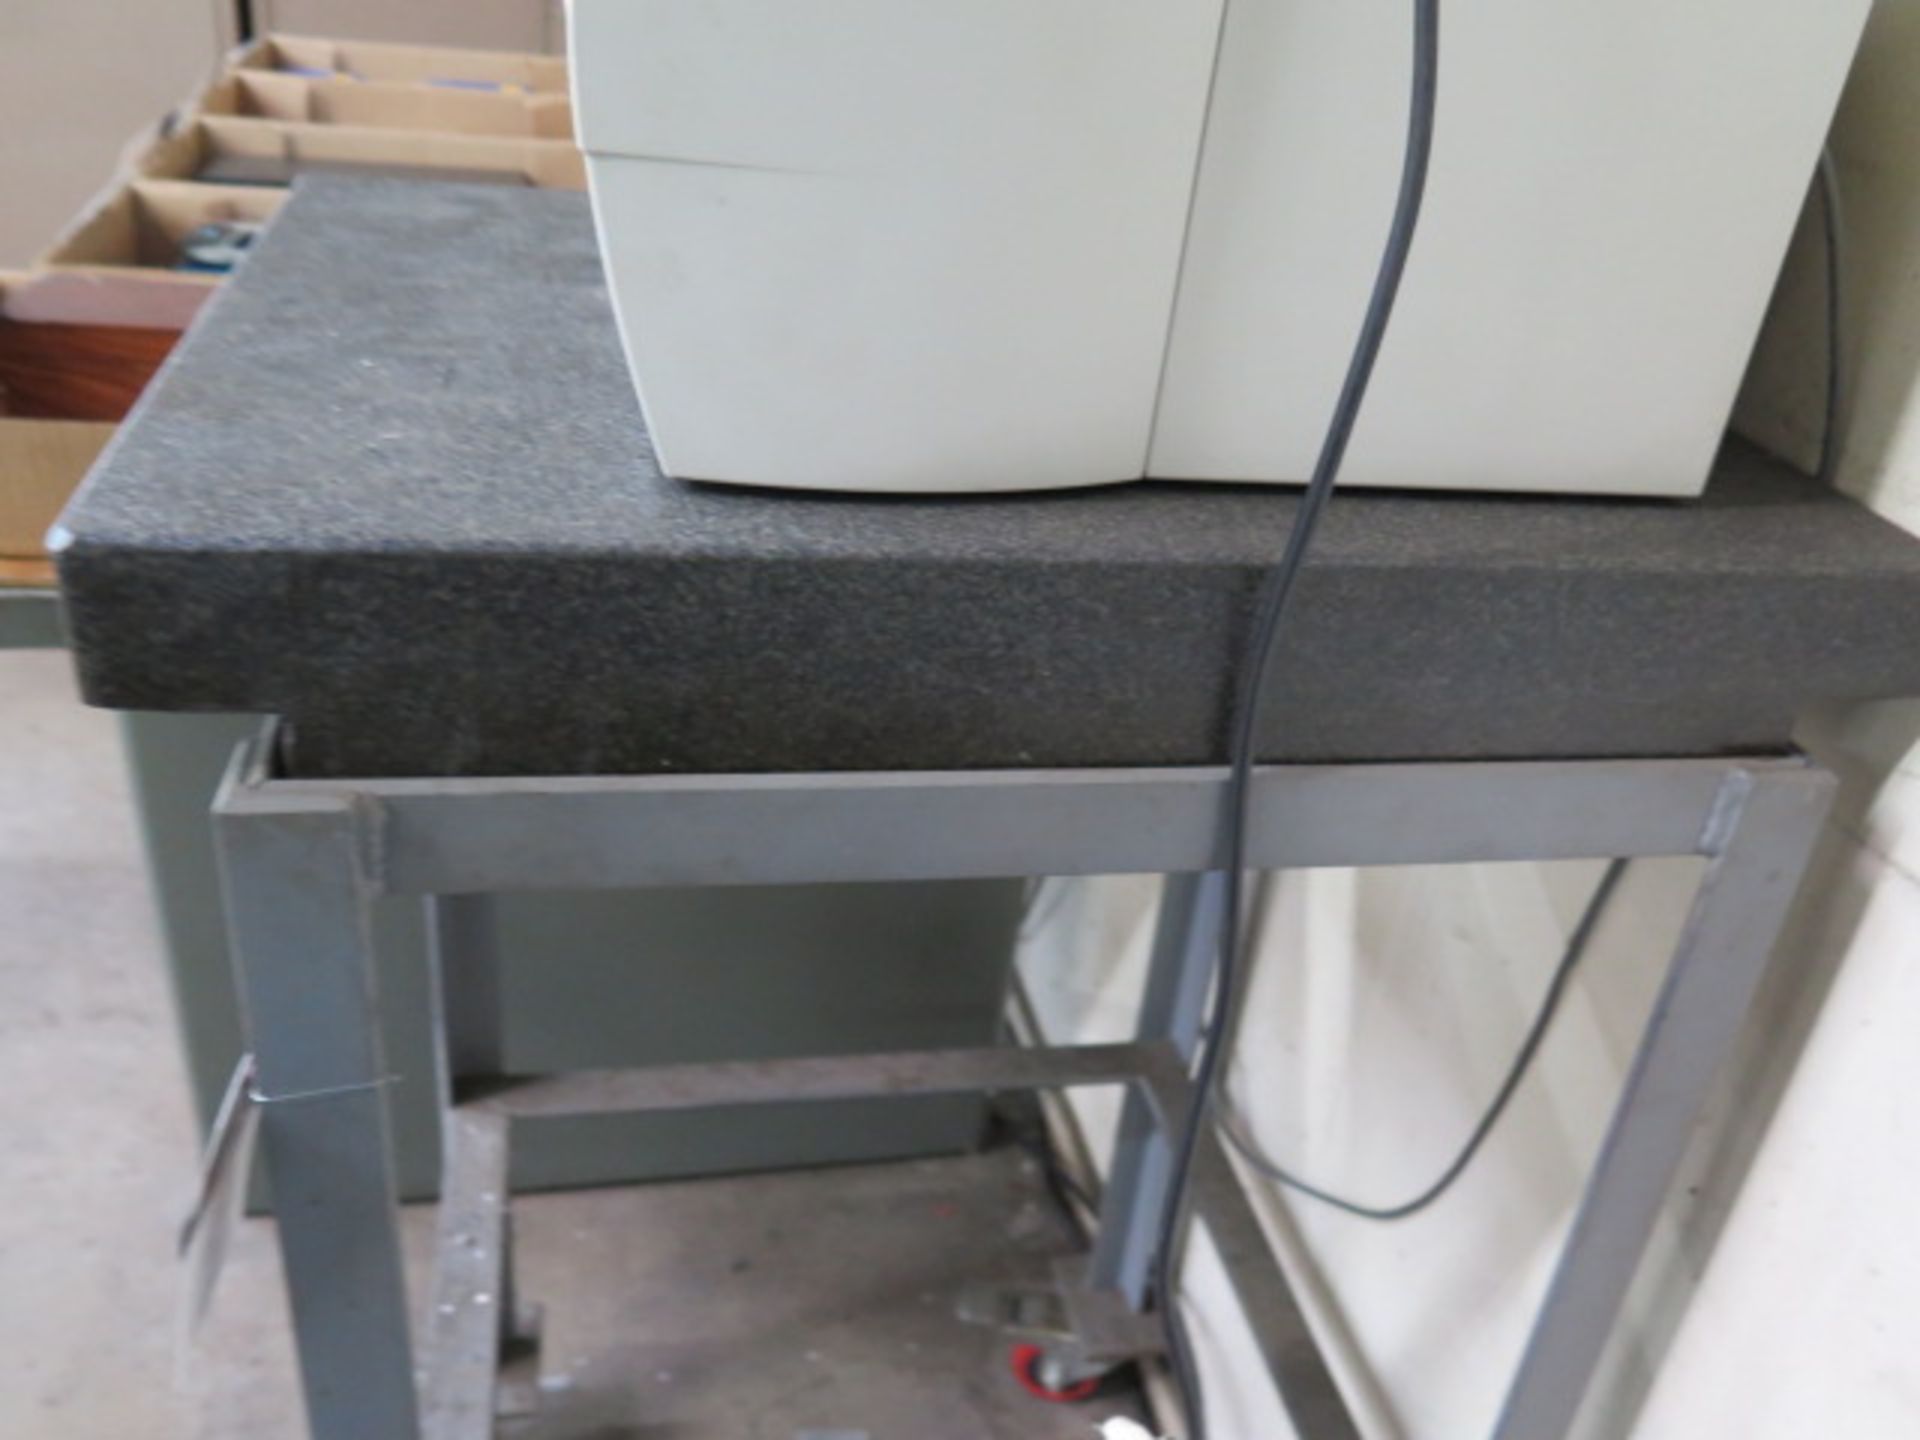 18" x 24" x 4" 2-Ledge Granite Surface Plate w/ Roll Stand (SOLD AS-IS - NO WARRANTY) - Image 4 of 5